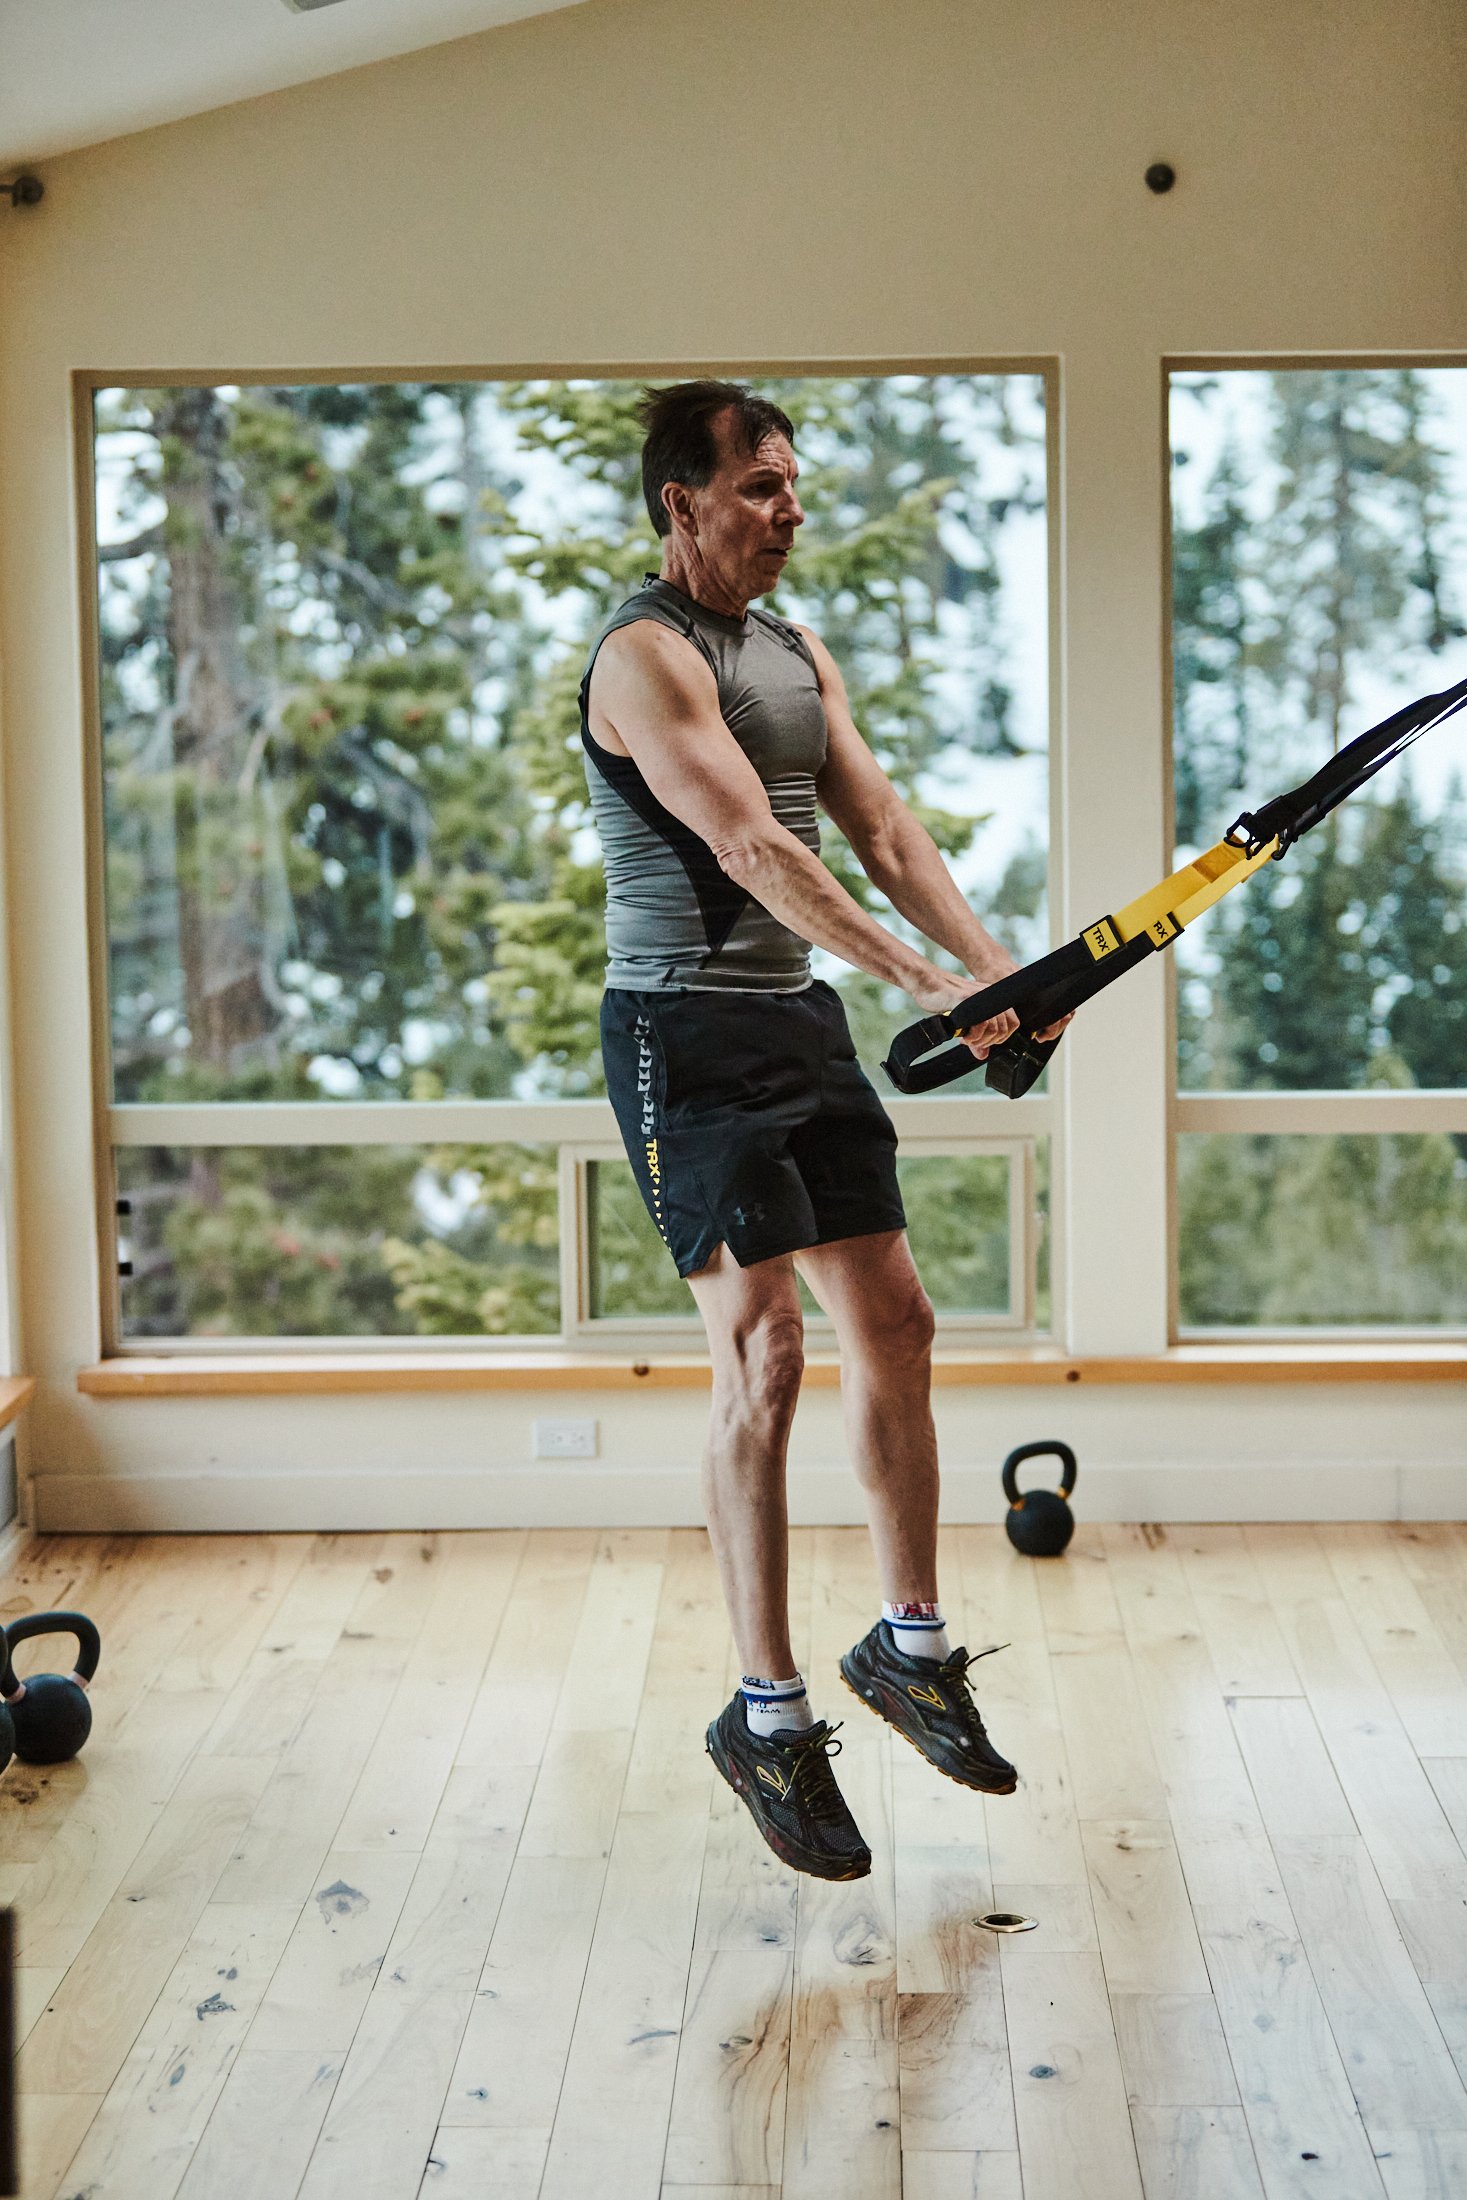 Walt Raineri, wearing a grey sleevess top, black shorts, and black sneakers, does a TRX squat jump. He's in a large room with windows overlooking snowcapped trees.